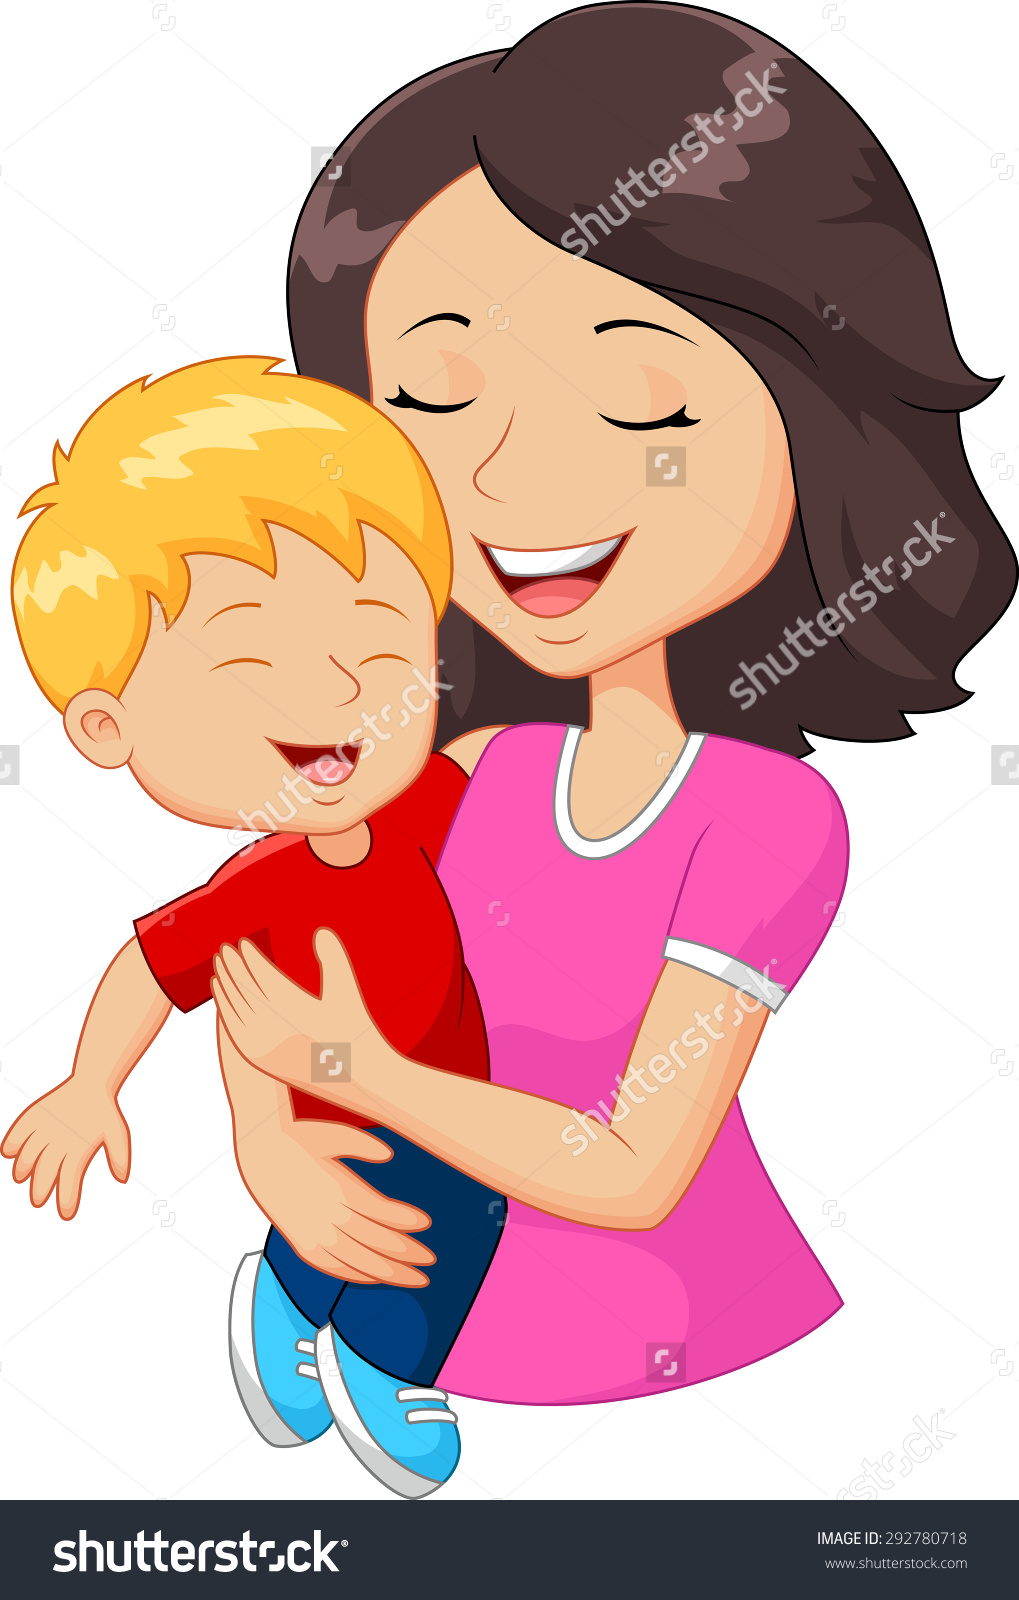 clipart of mother and baby - photo #34